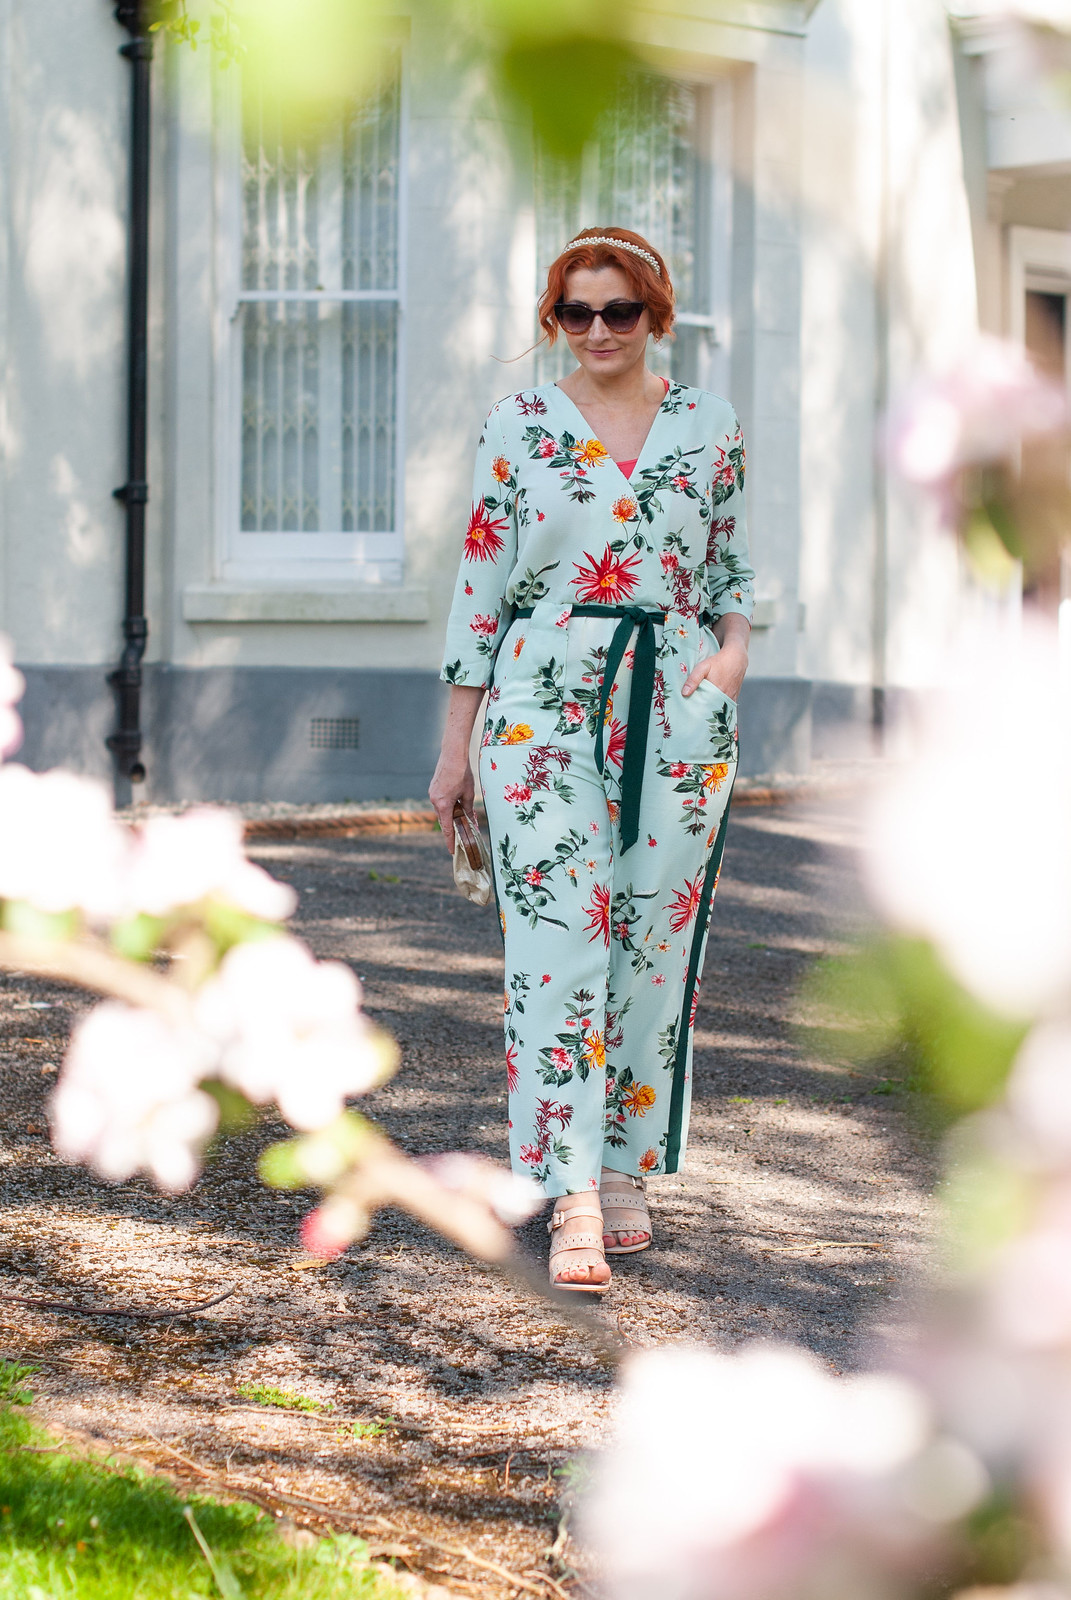 Over 40 Fashion: The Jumpsuit and Nude Sandals All Your Weddings and Garden Parties Can't Do Without This Summer | Not Dressed As Lamb